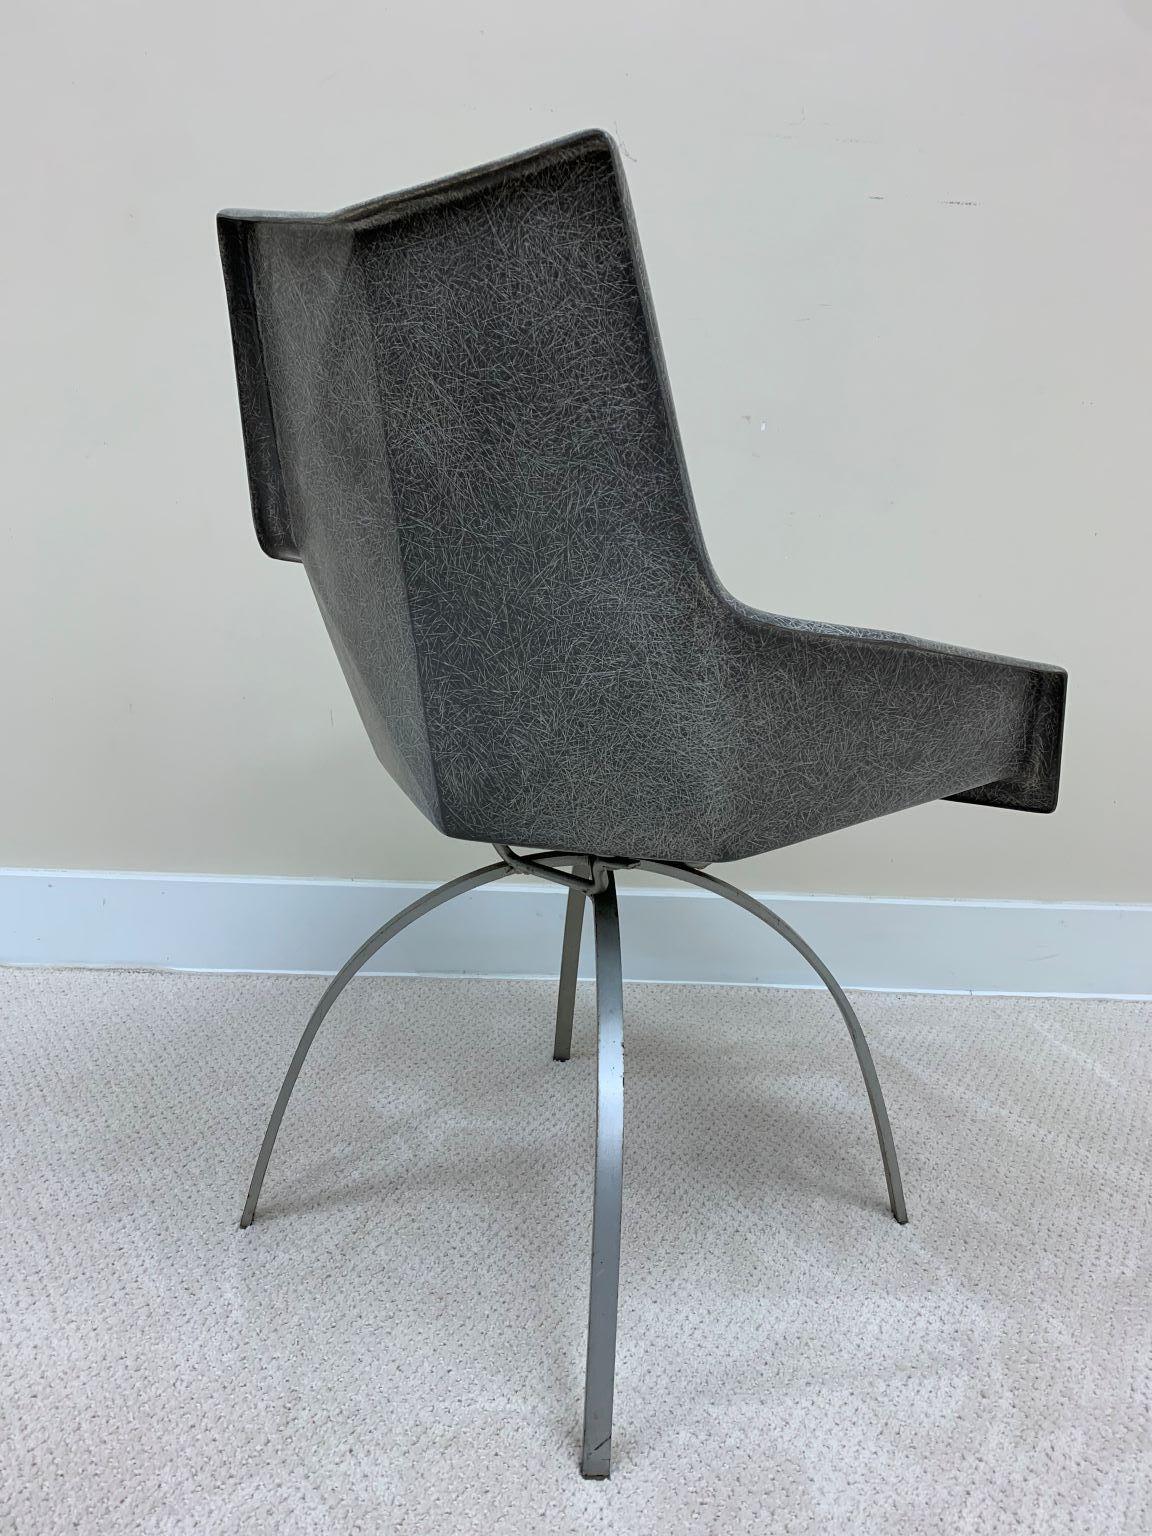 Iconic and Rare Origami Fiberglass Chair with Spider Leg Base by Paul McCobb 3